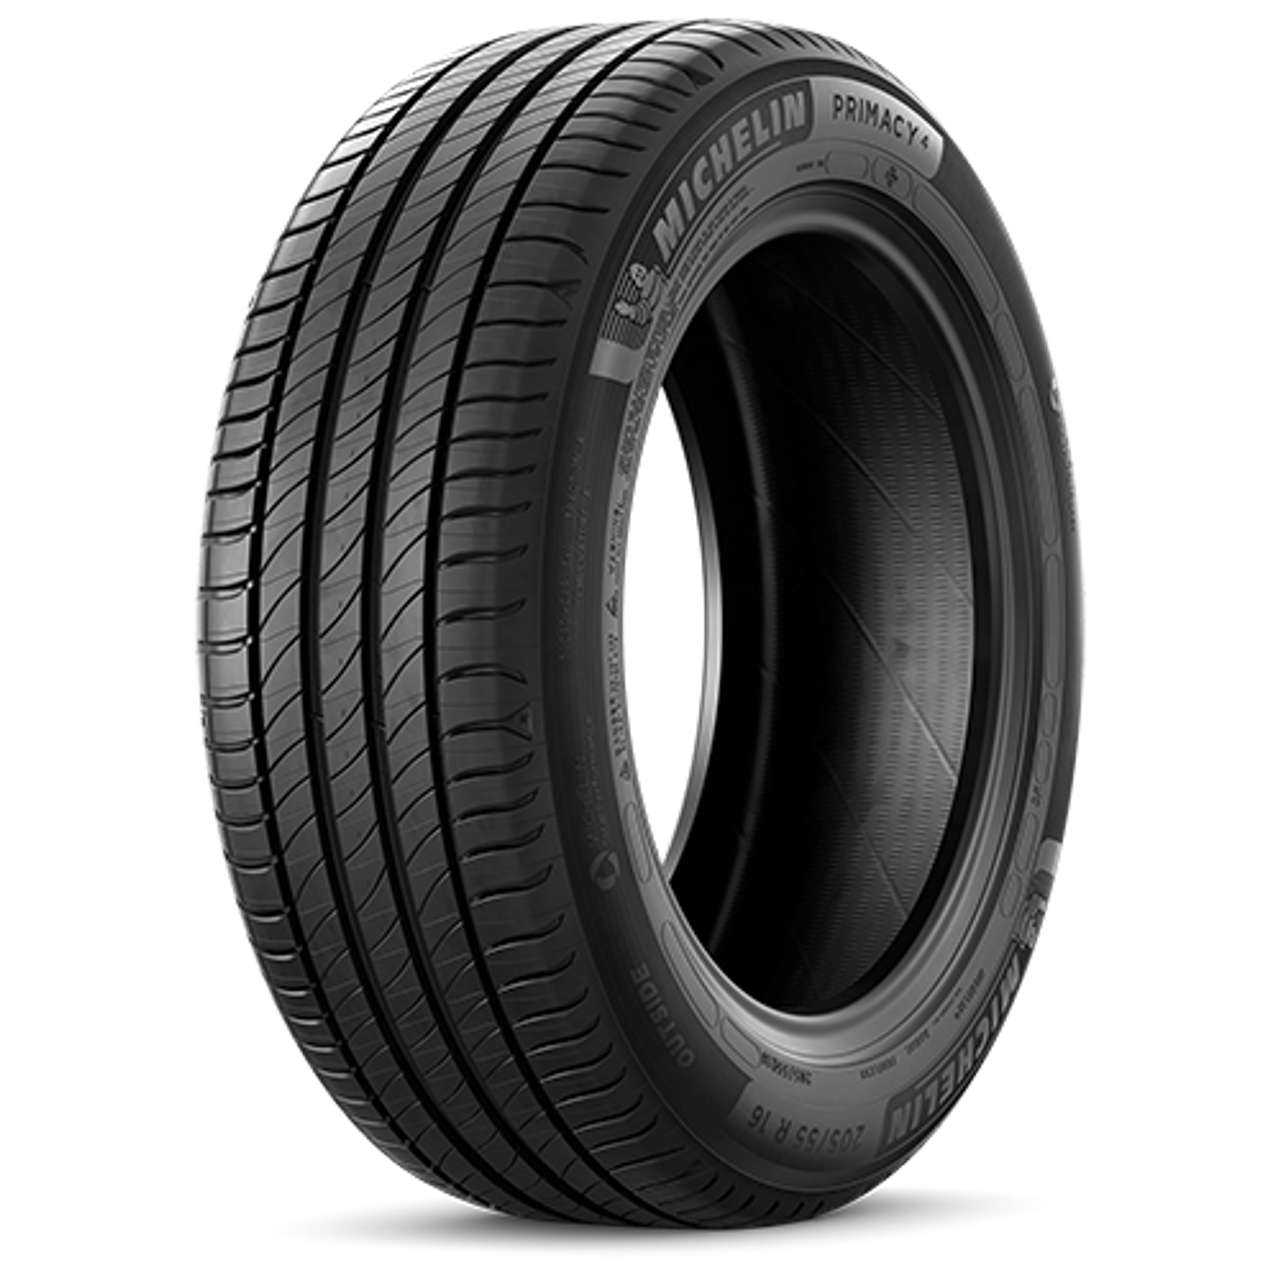 MICHELIN PRIMACY 4+ 225/50R17 94Y BSW